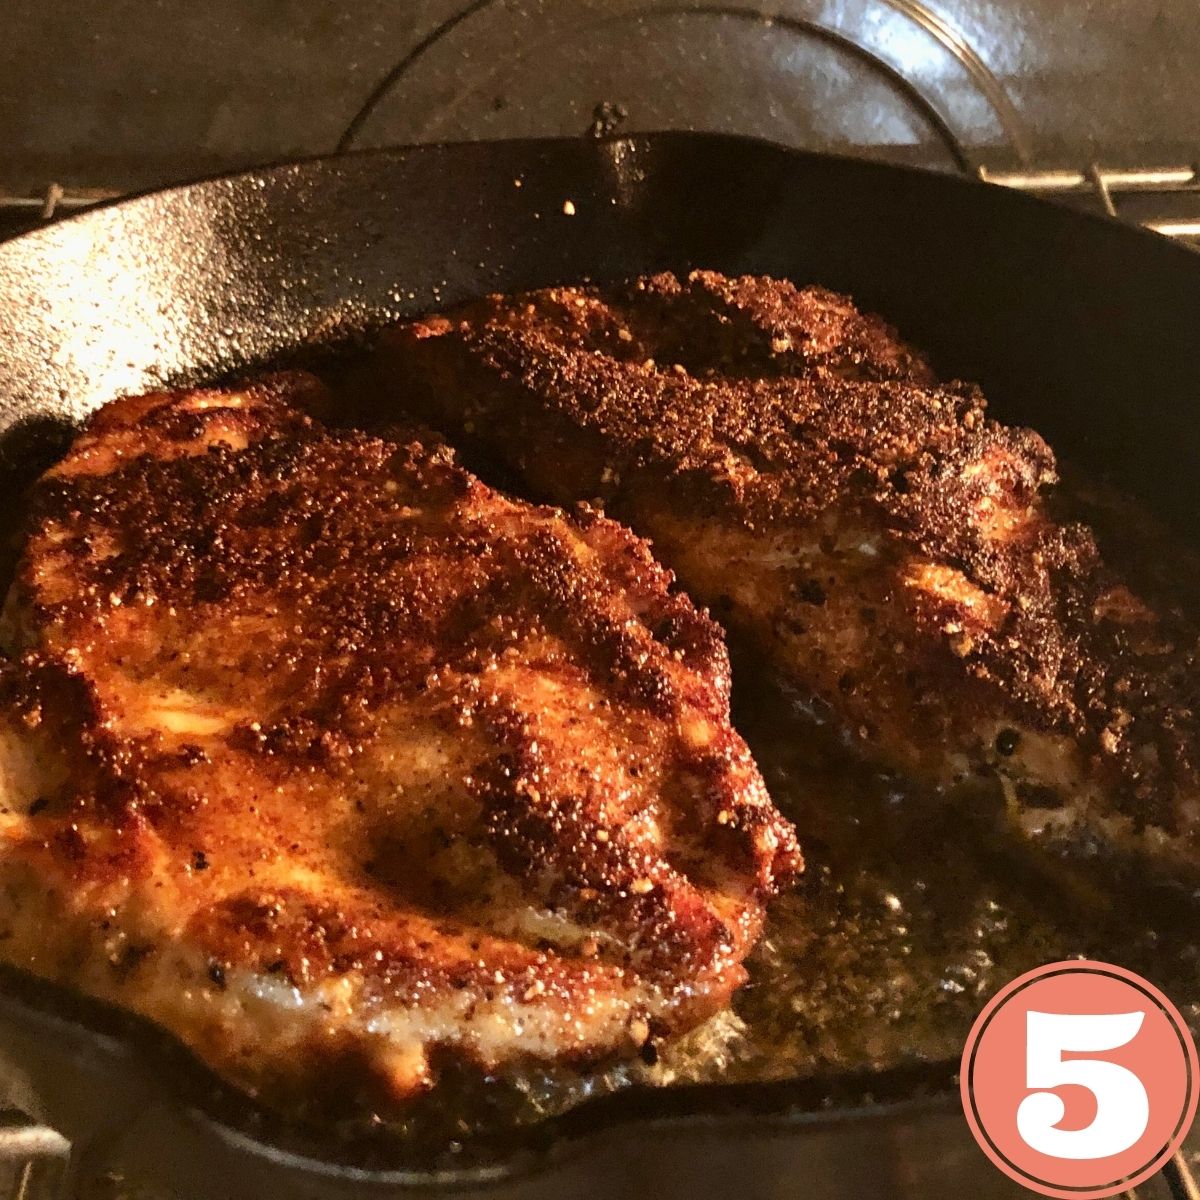 two chicken cutlets in a cast iron skillet on the center rack in the oven